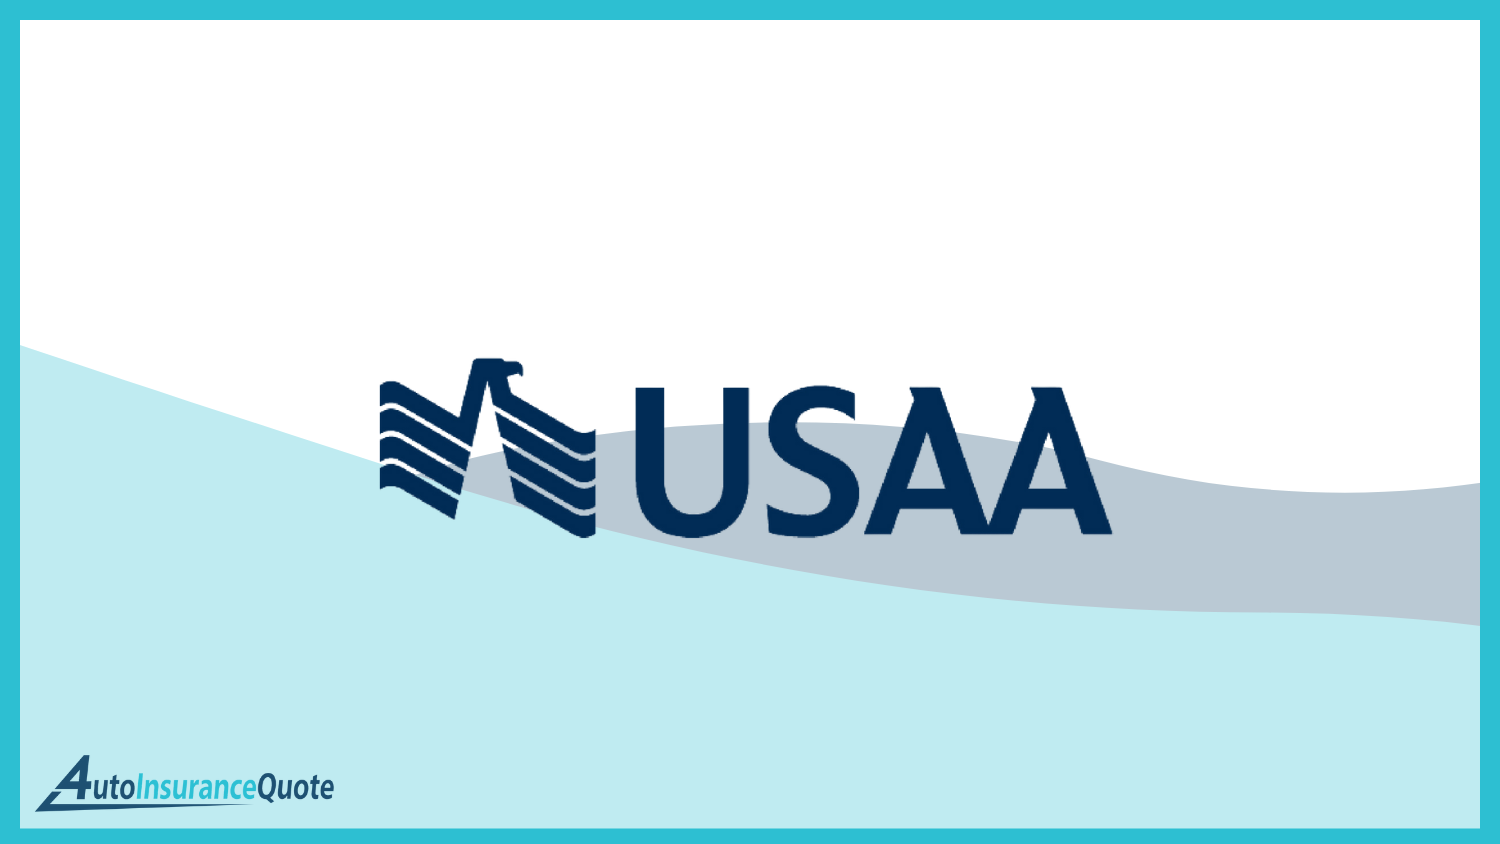 USAA: Best Auto Insurance for Government Employees